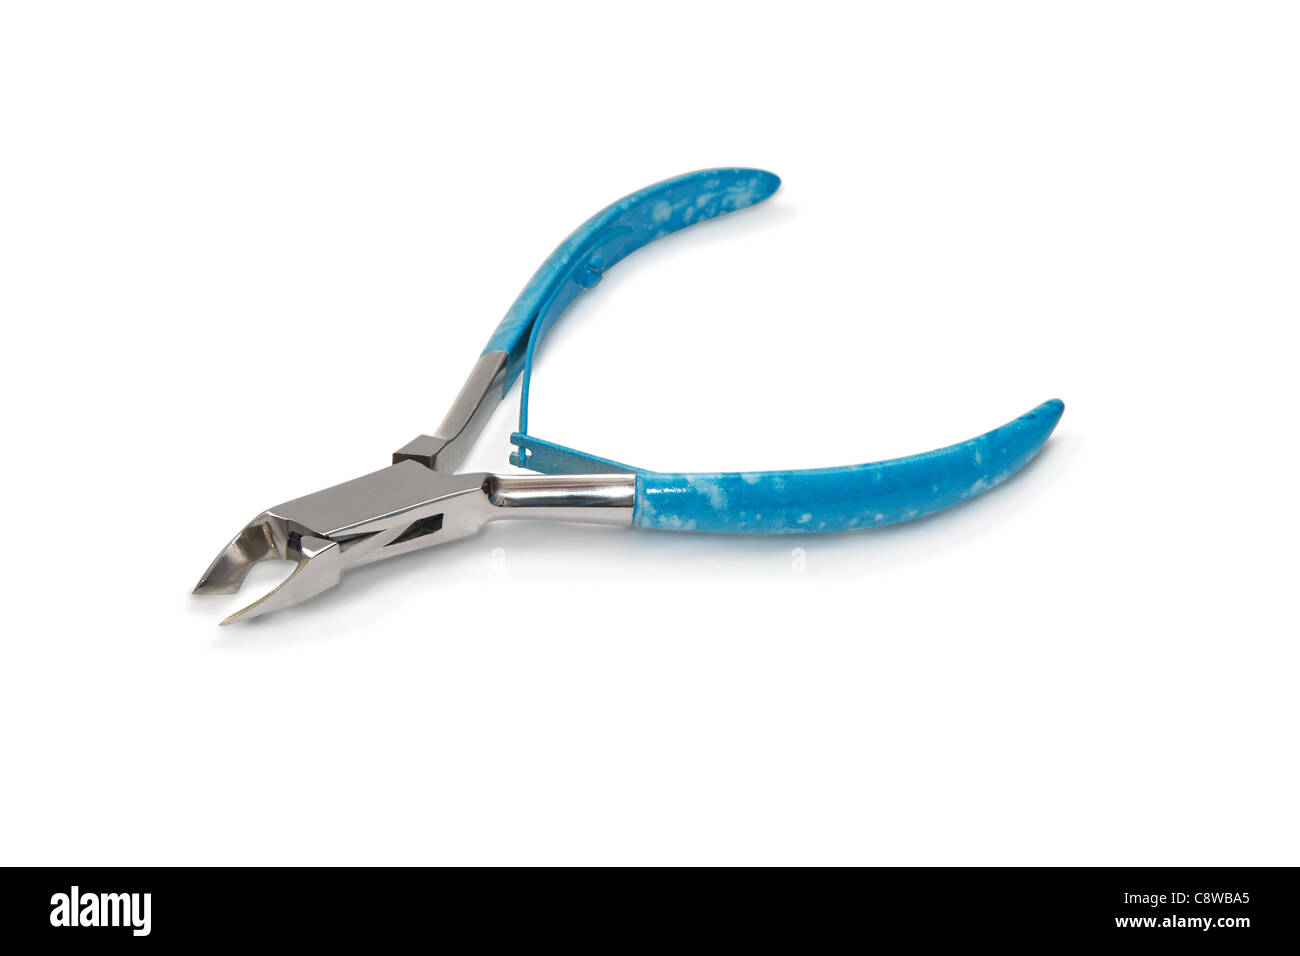 Metal manicure nippers with blue plastic handles. Stock Photo